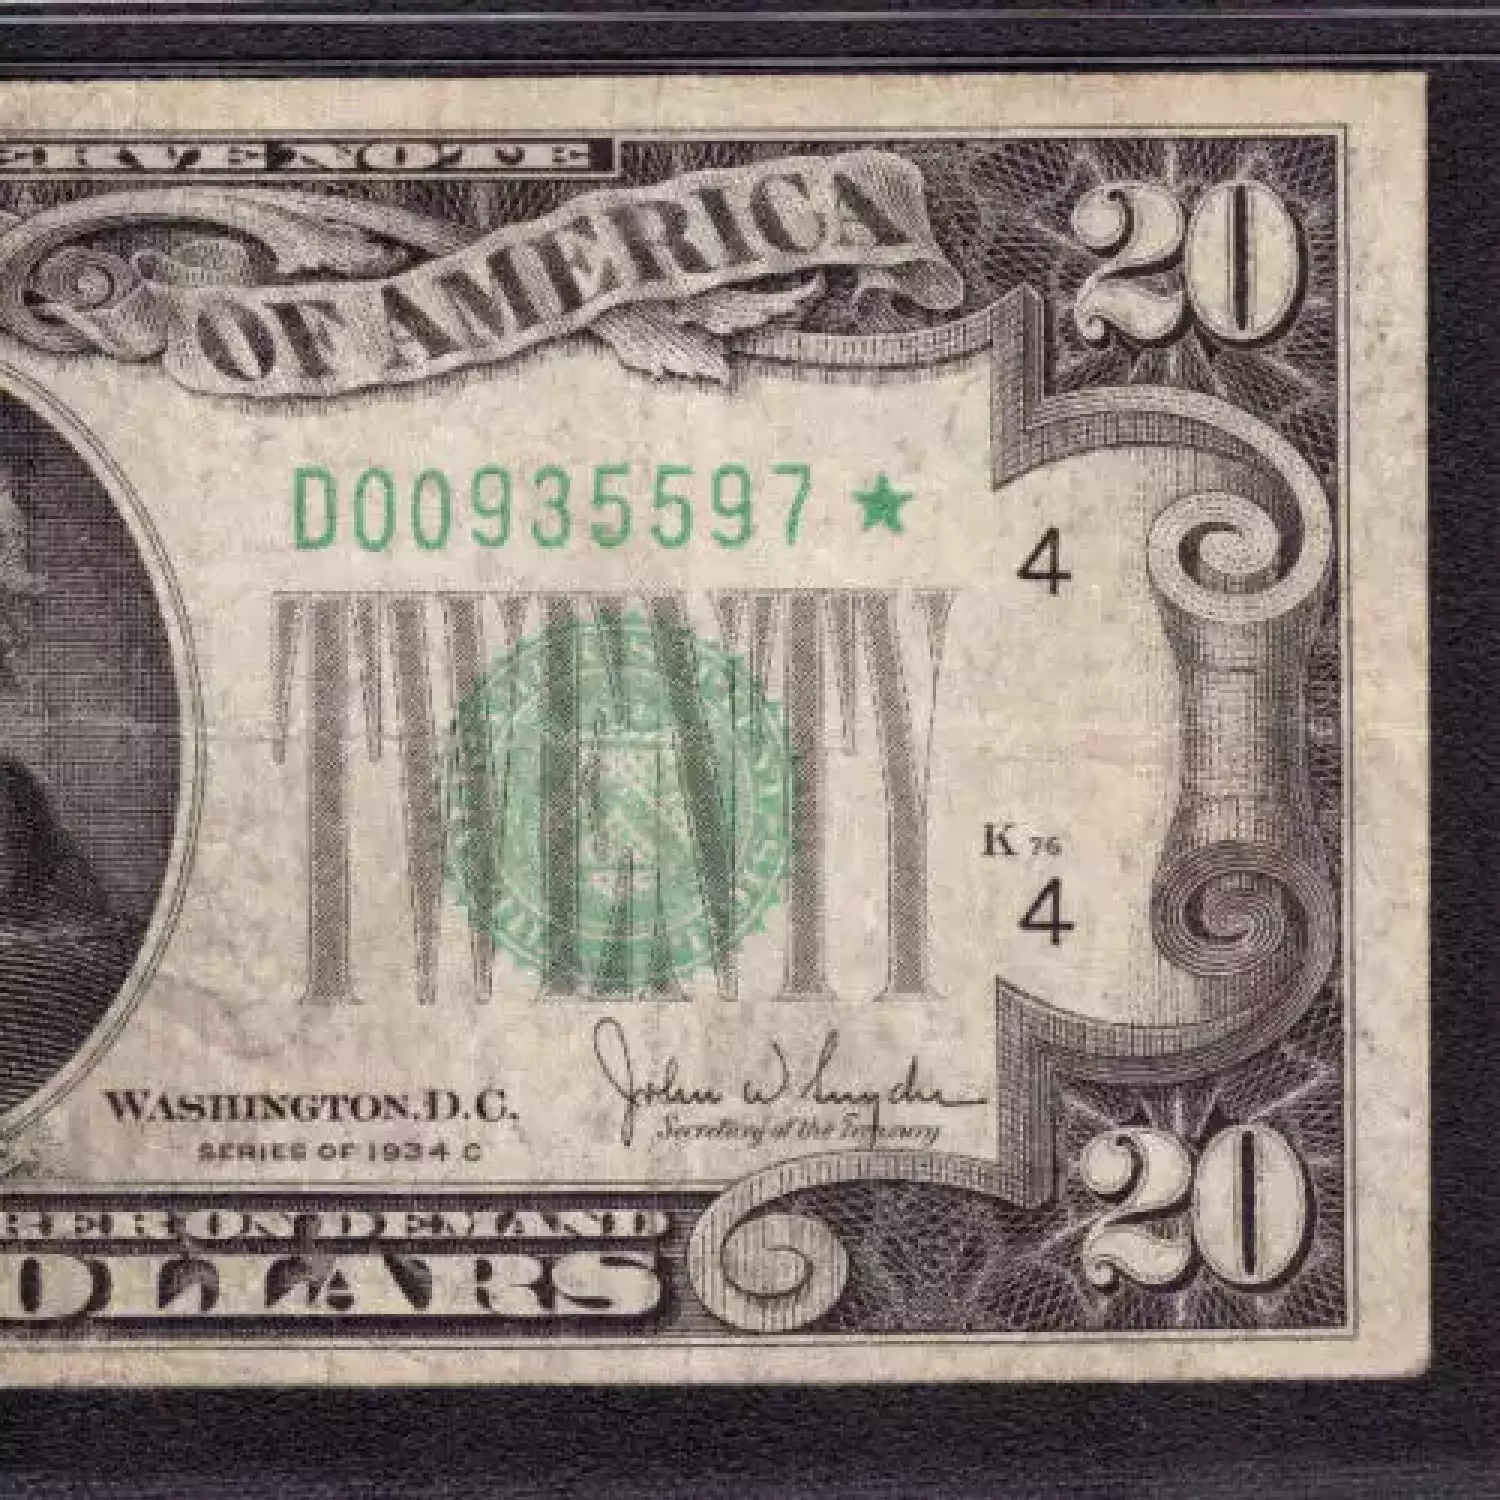 $20 1934-C. blue-Green seal. Small Size $20 Federal Reserve Notes 2057-D* (3)